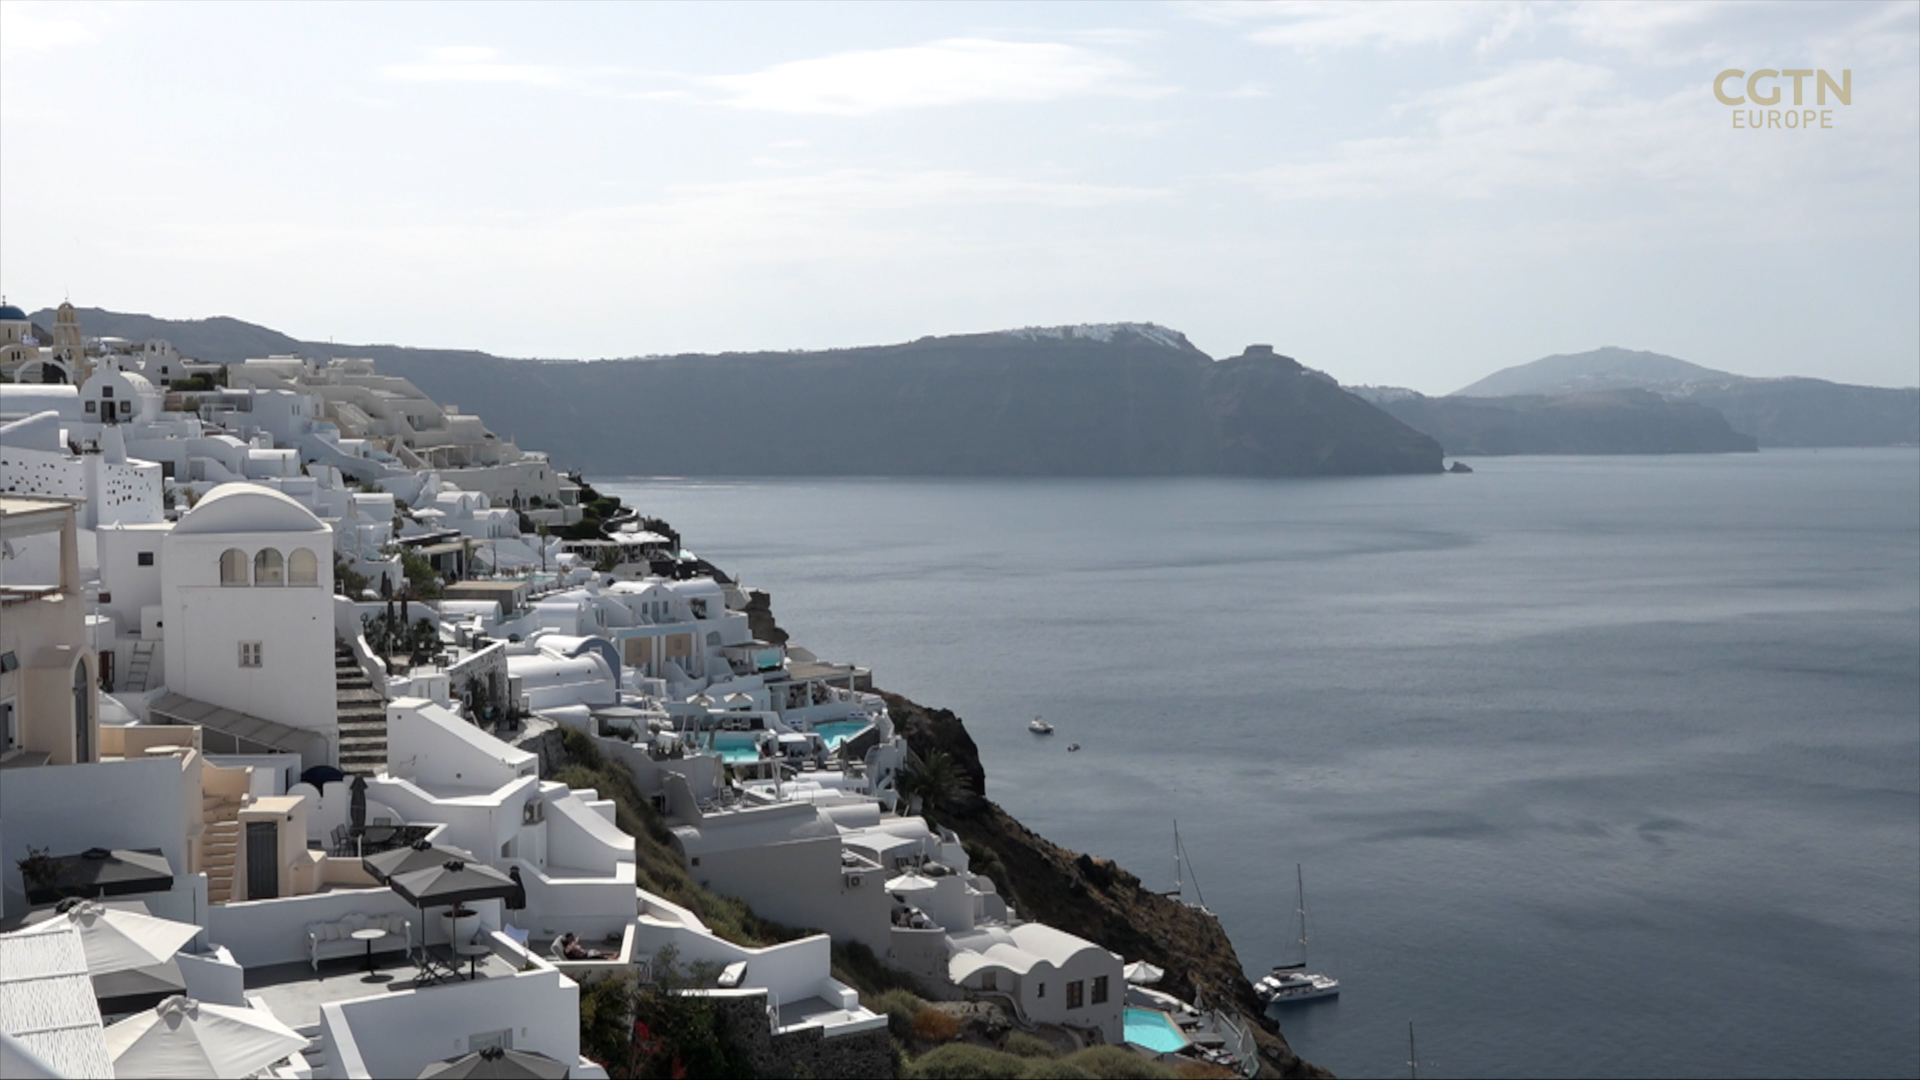 Picturesque Santorini is among the places promoted by the Greek government. /CGTN